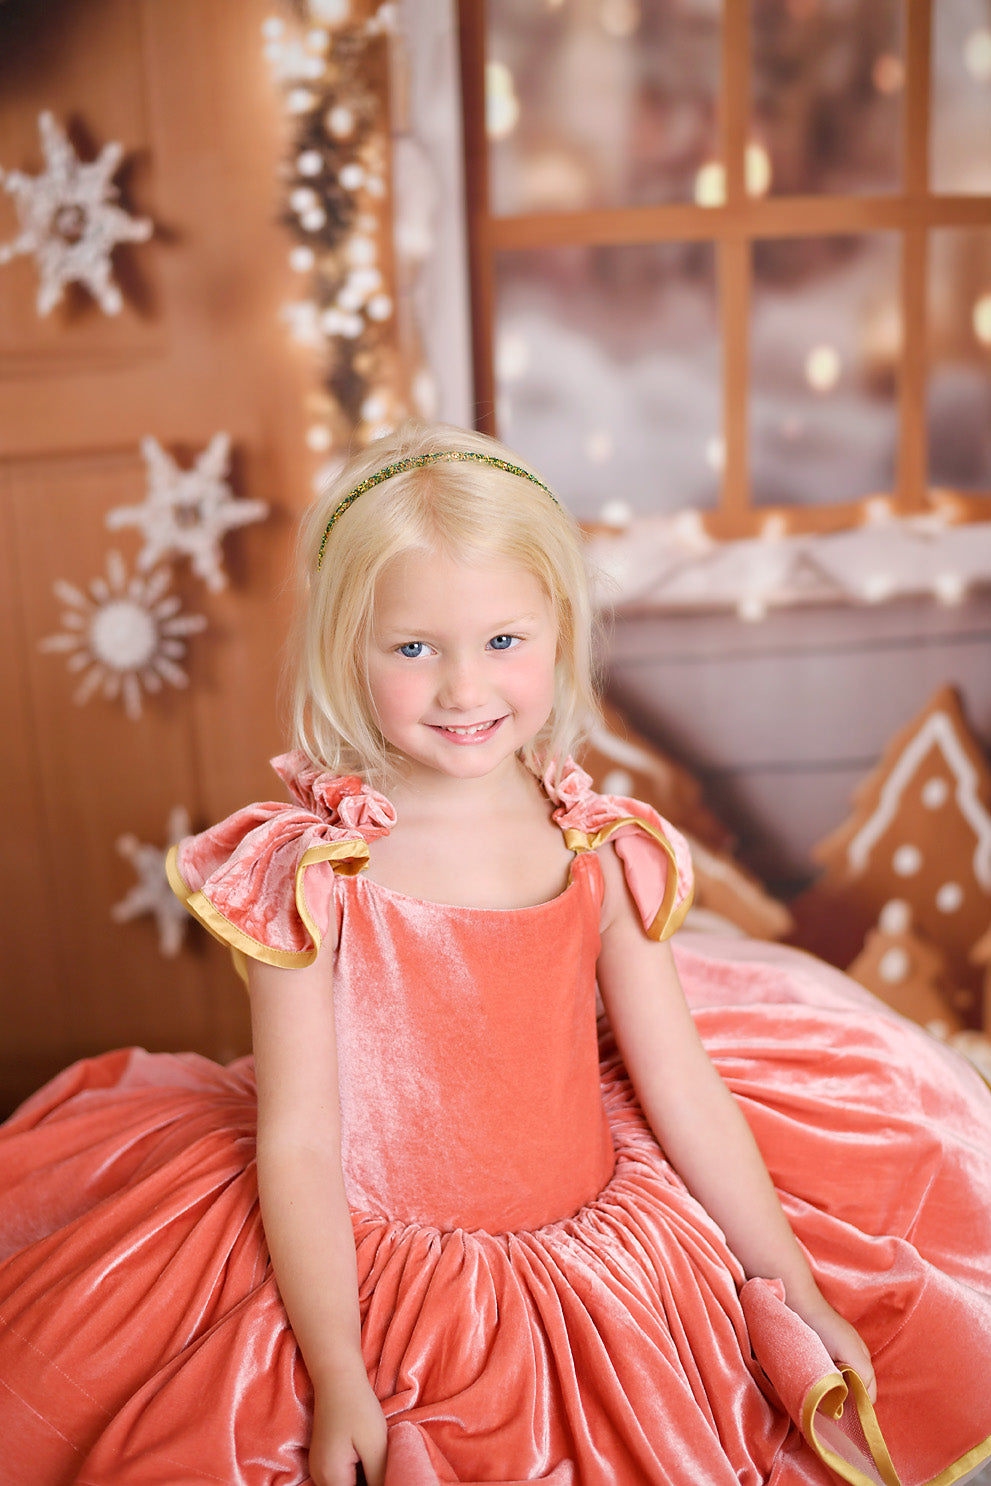 Couture gown rental: "Kimberly" - Velvet Petal Length Dress ( 5 Year - Petite 7 Year)